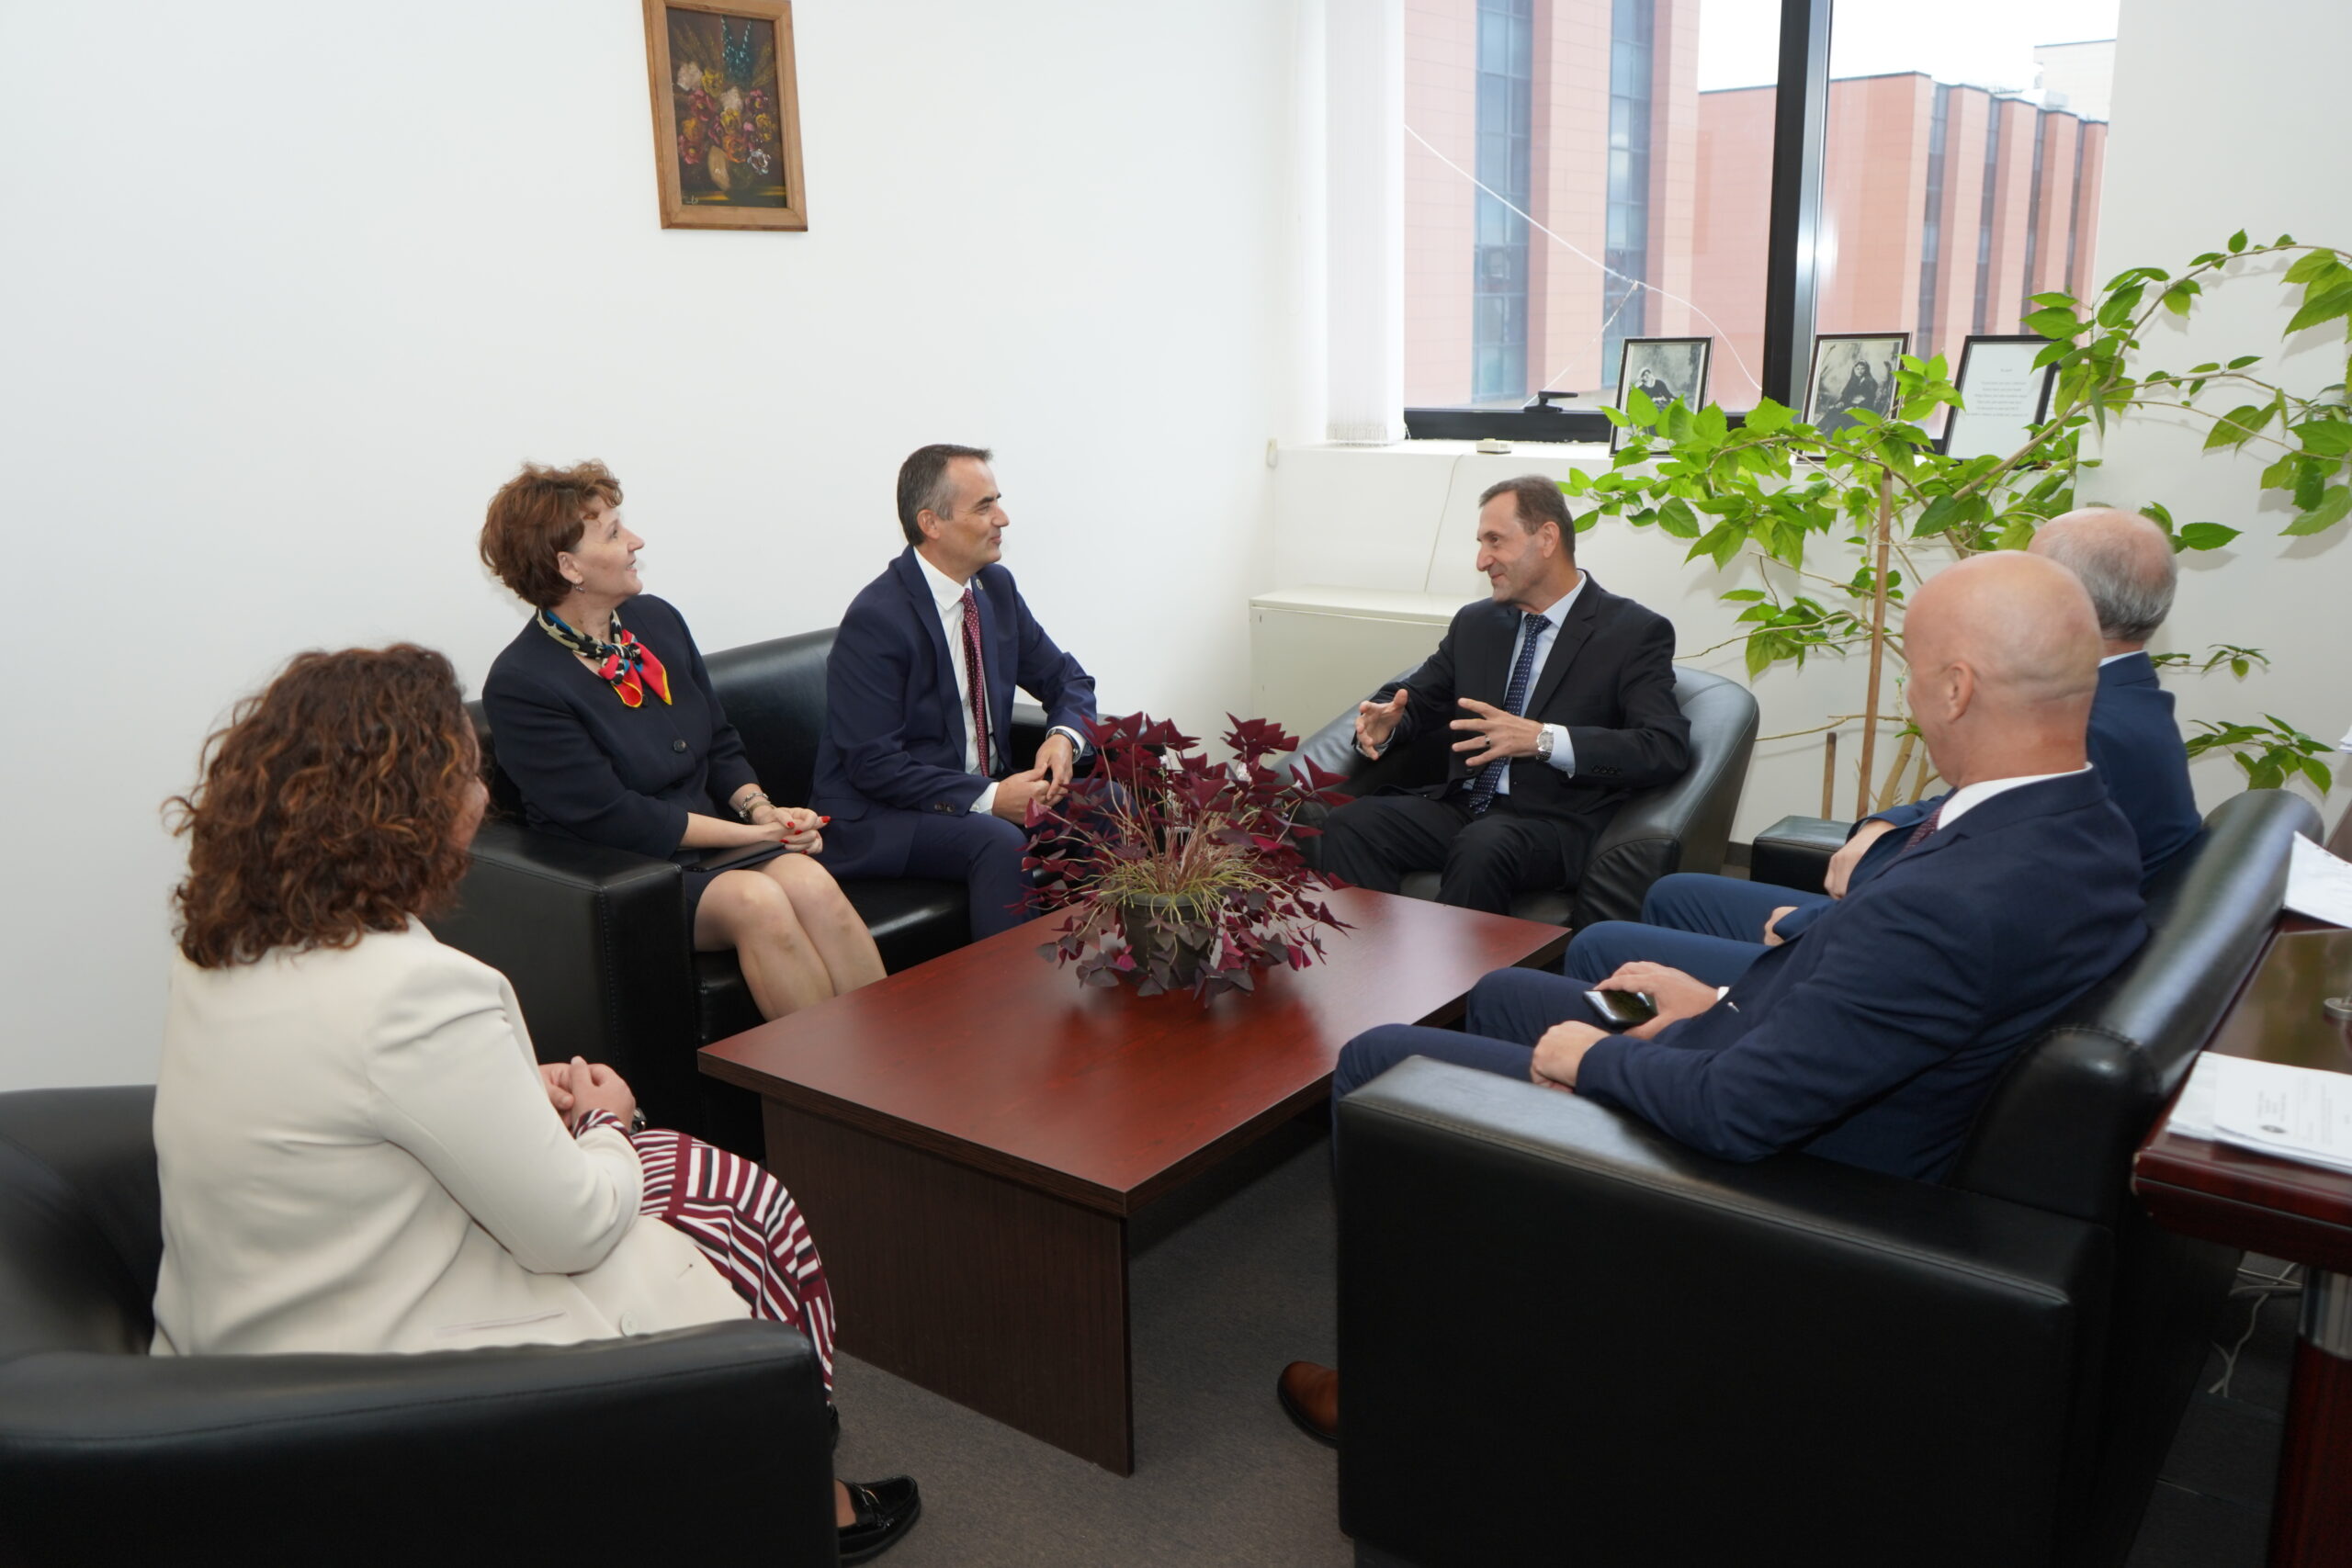 Rector Musaj, Accompanied By The Vice-rectors And The President Of The Student Parliament, Visited The Academic Units